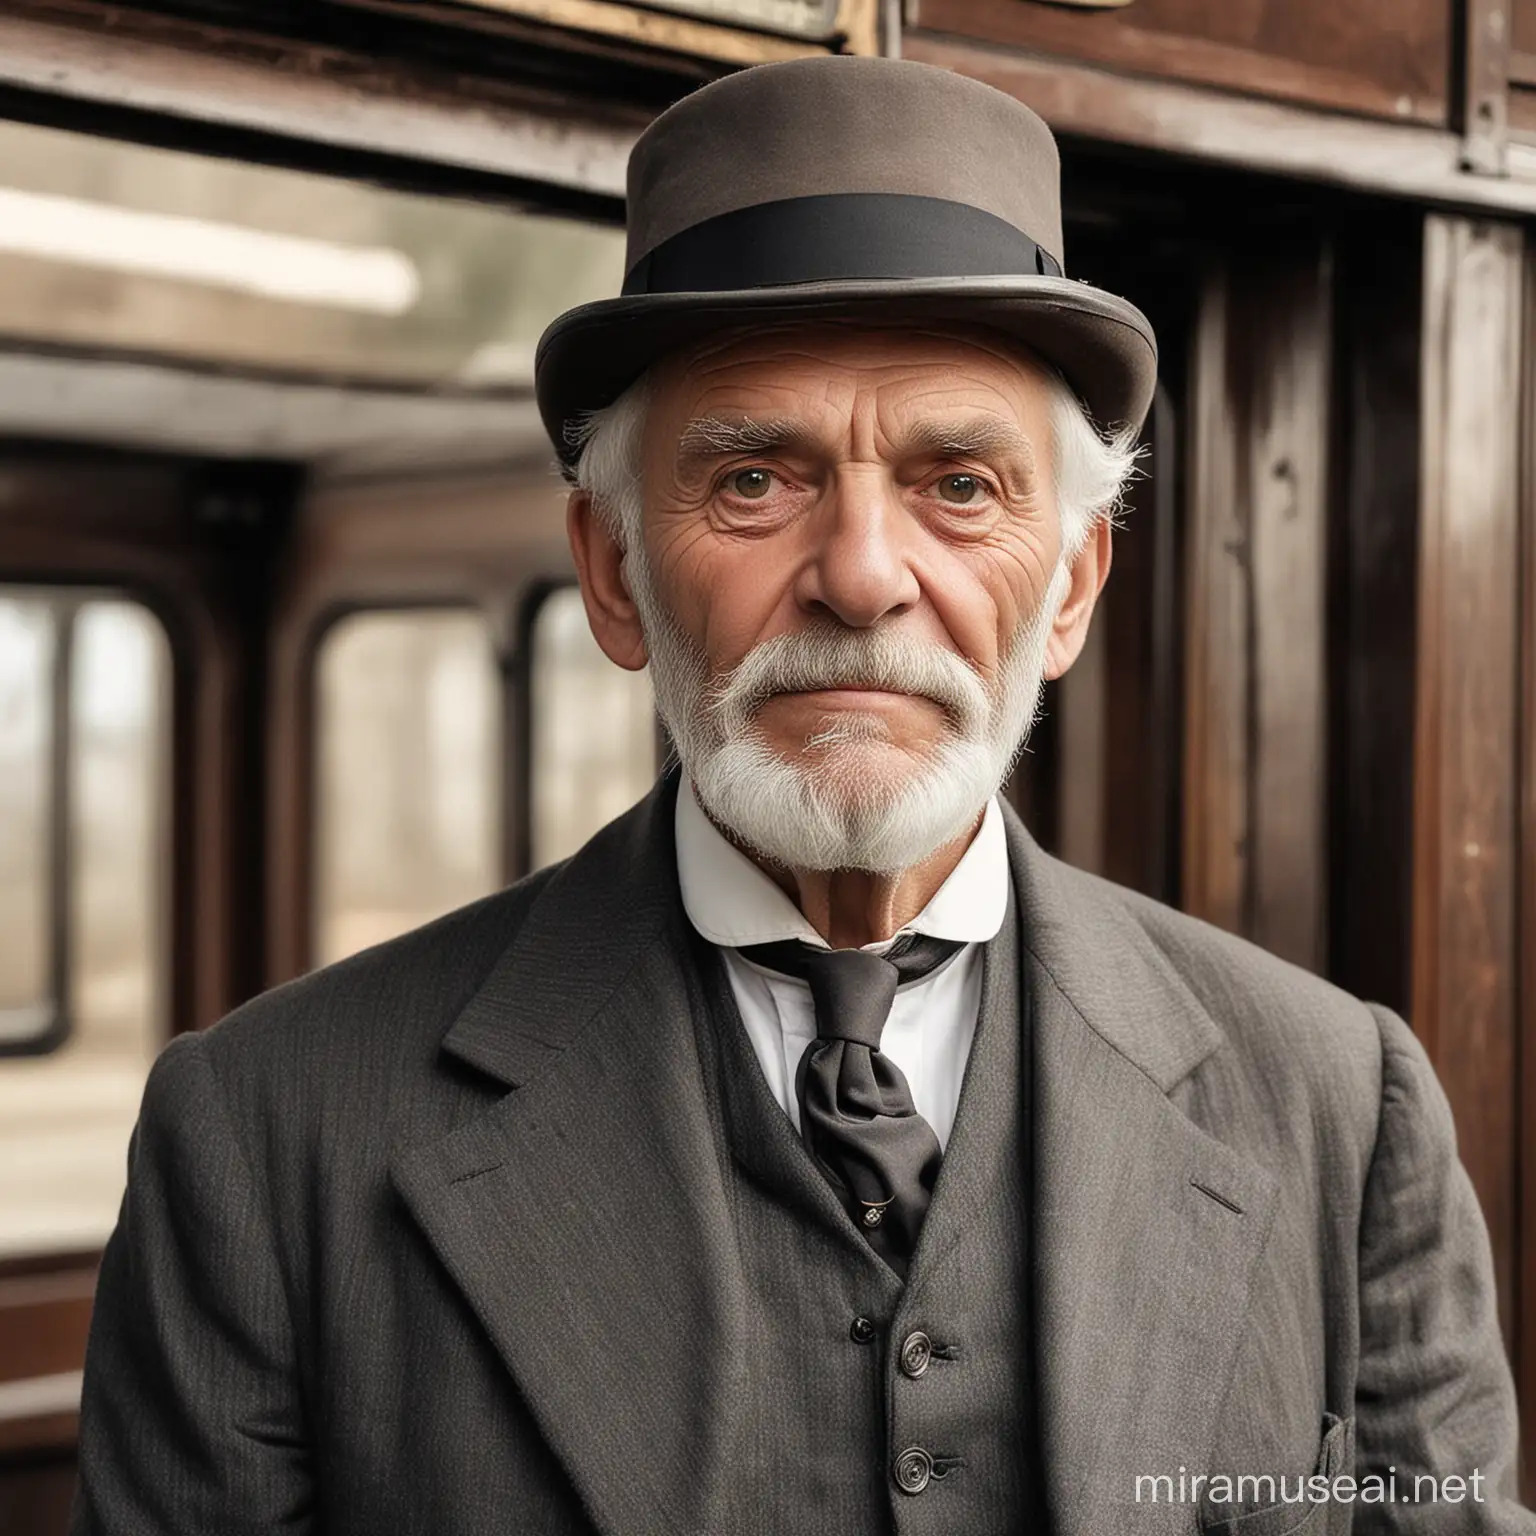 old man train conductor from 1901